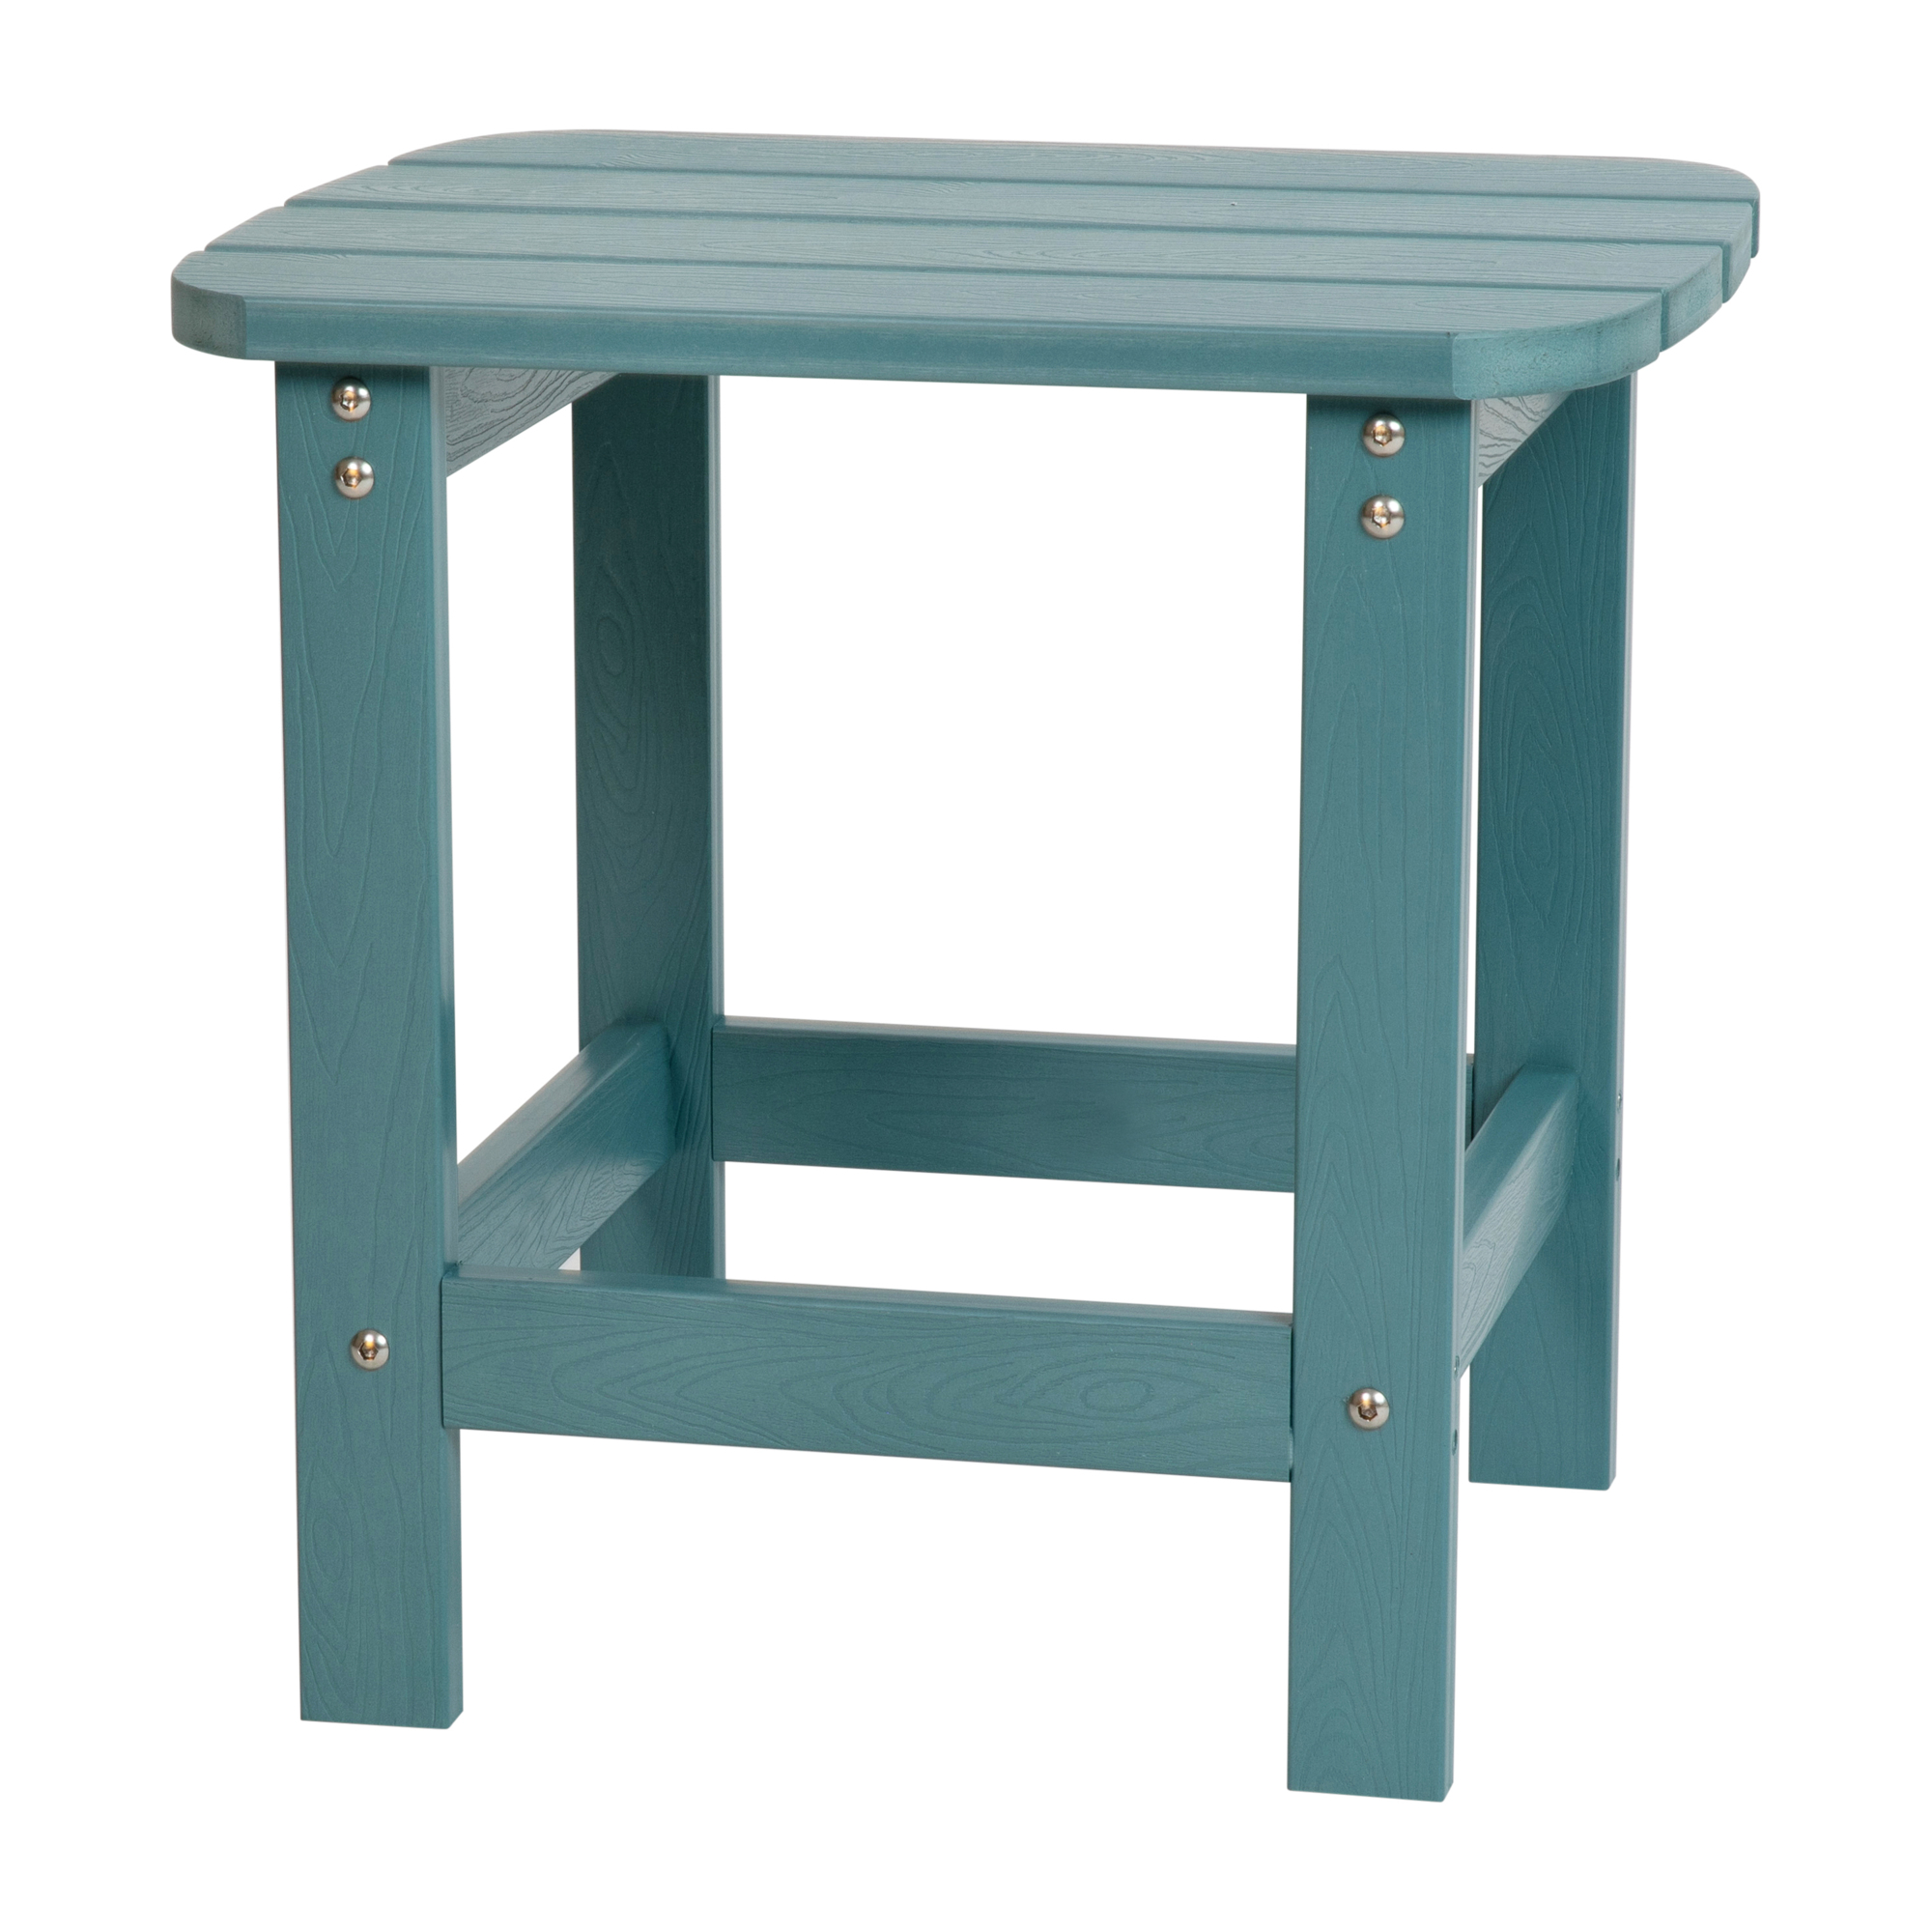 Flash Furniture, Teal All-Weather Adirondack Side Table, Table Shape Rectangle, Primary Color Blue, Height 18.25 in, Model JJT14001TL